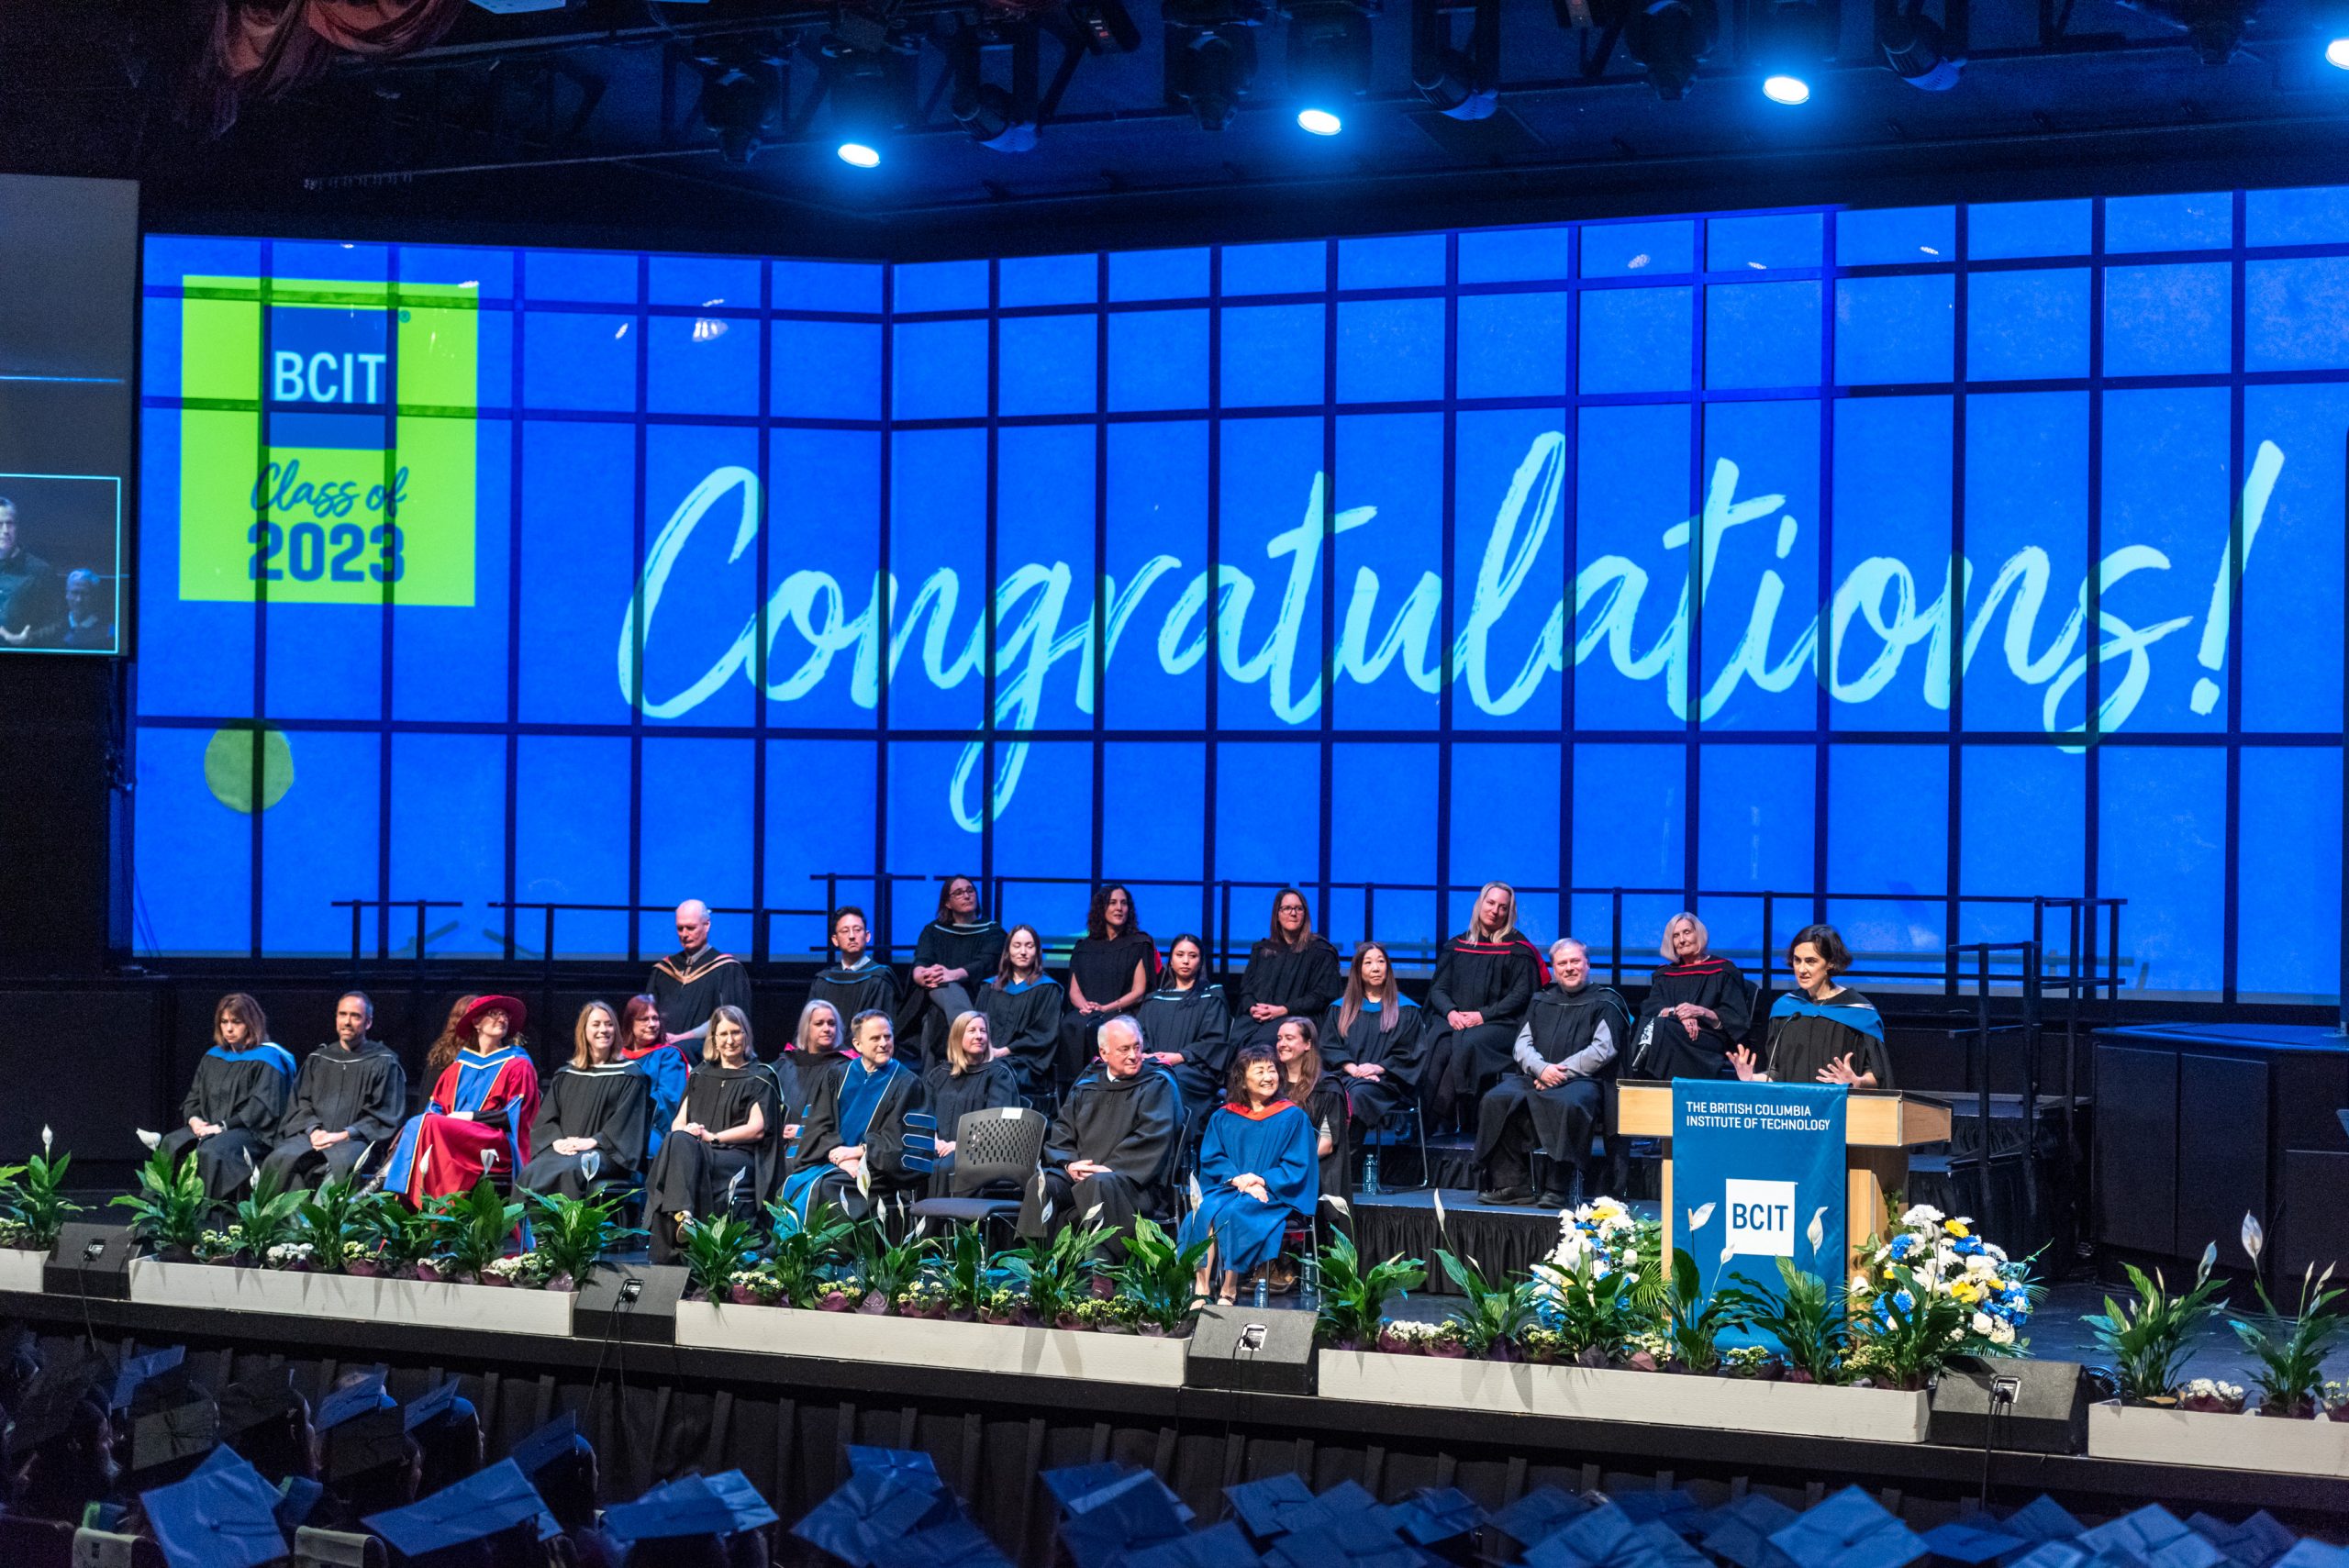 A wide shot of the platform party on the auditorium stage, with a large congratulations text as a background on the digital screen.